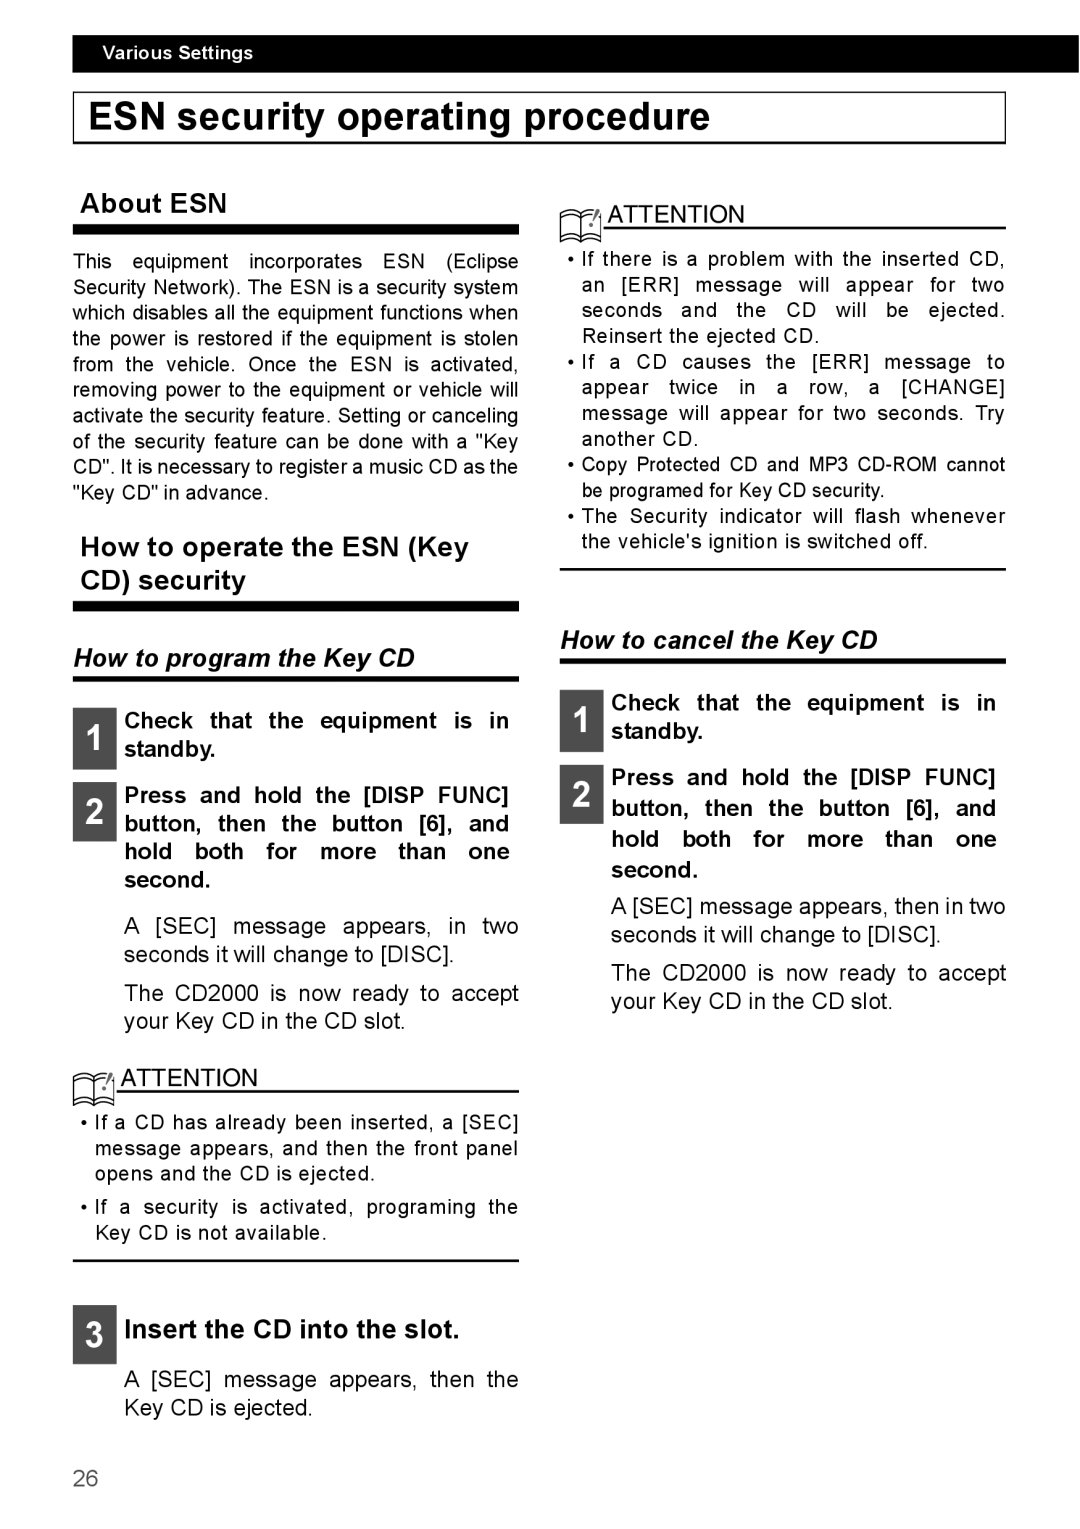 Eclipse - Fujitsu Ten CD2000 manual ESN security operating procedure, About ESN, How to operate the ESN Key CD security 